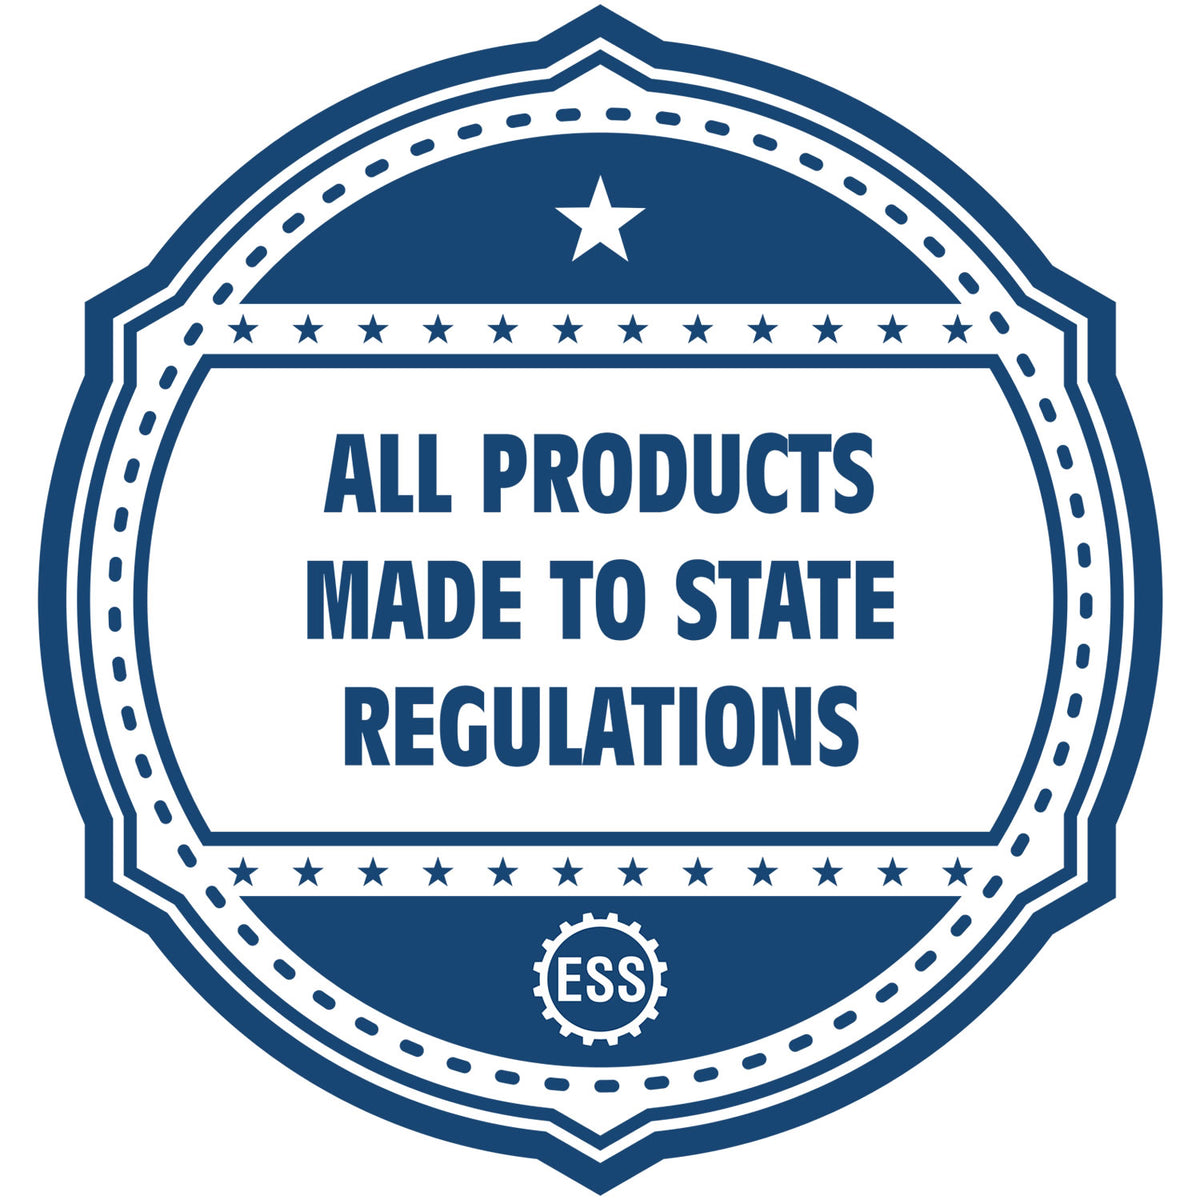 An icon or badge element for the MaxLight Premium Pre-Inked Washington Rectangular Notarial Stamp showing that this product is made in compliance with state regulations.